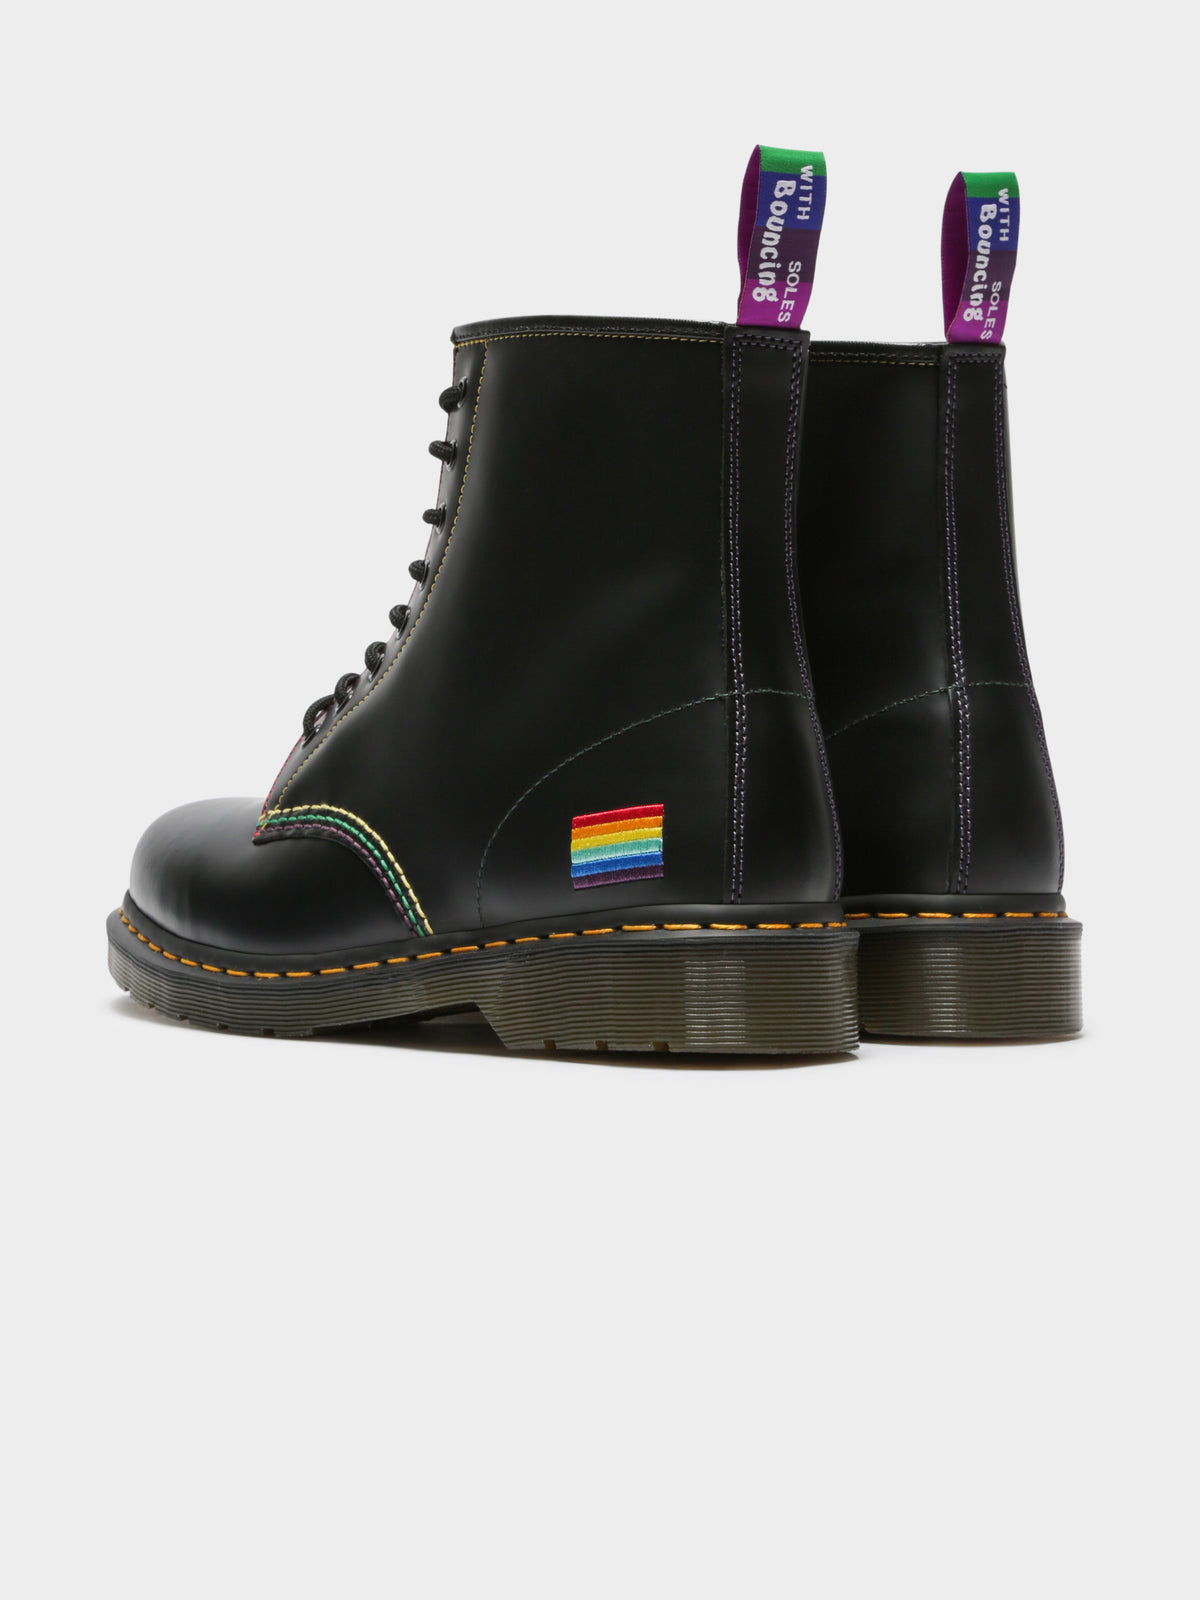 Unisex 2460 Pride Smooth Lace Up Boots in Black